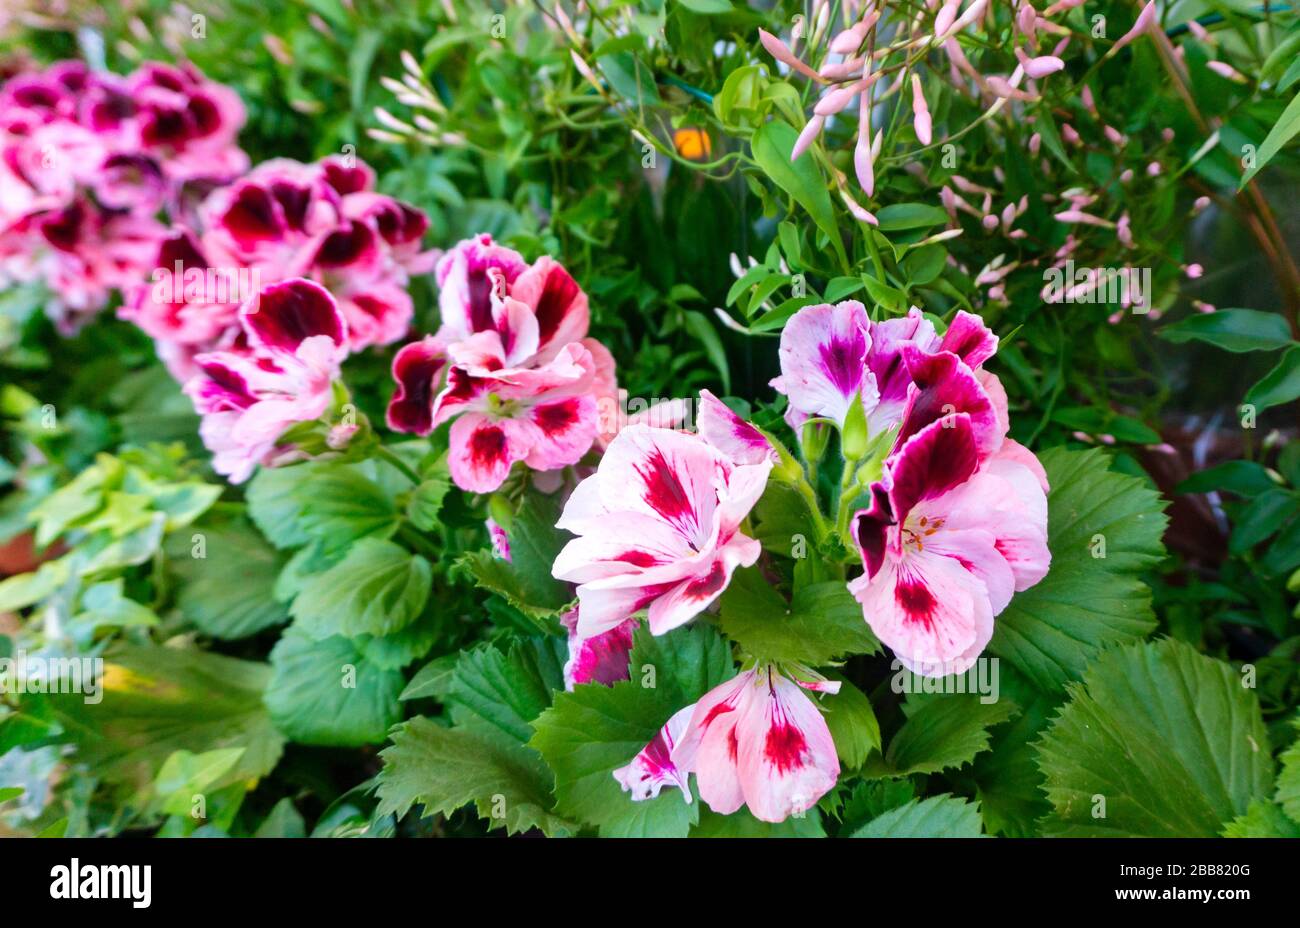 Bright picture of a geranium angel plant on a background of green plants. Bicolor white-pink angel pelargonium in a beautiful flower garden. Pelargoni Stock Photo